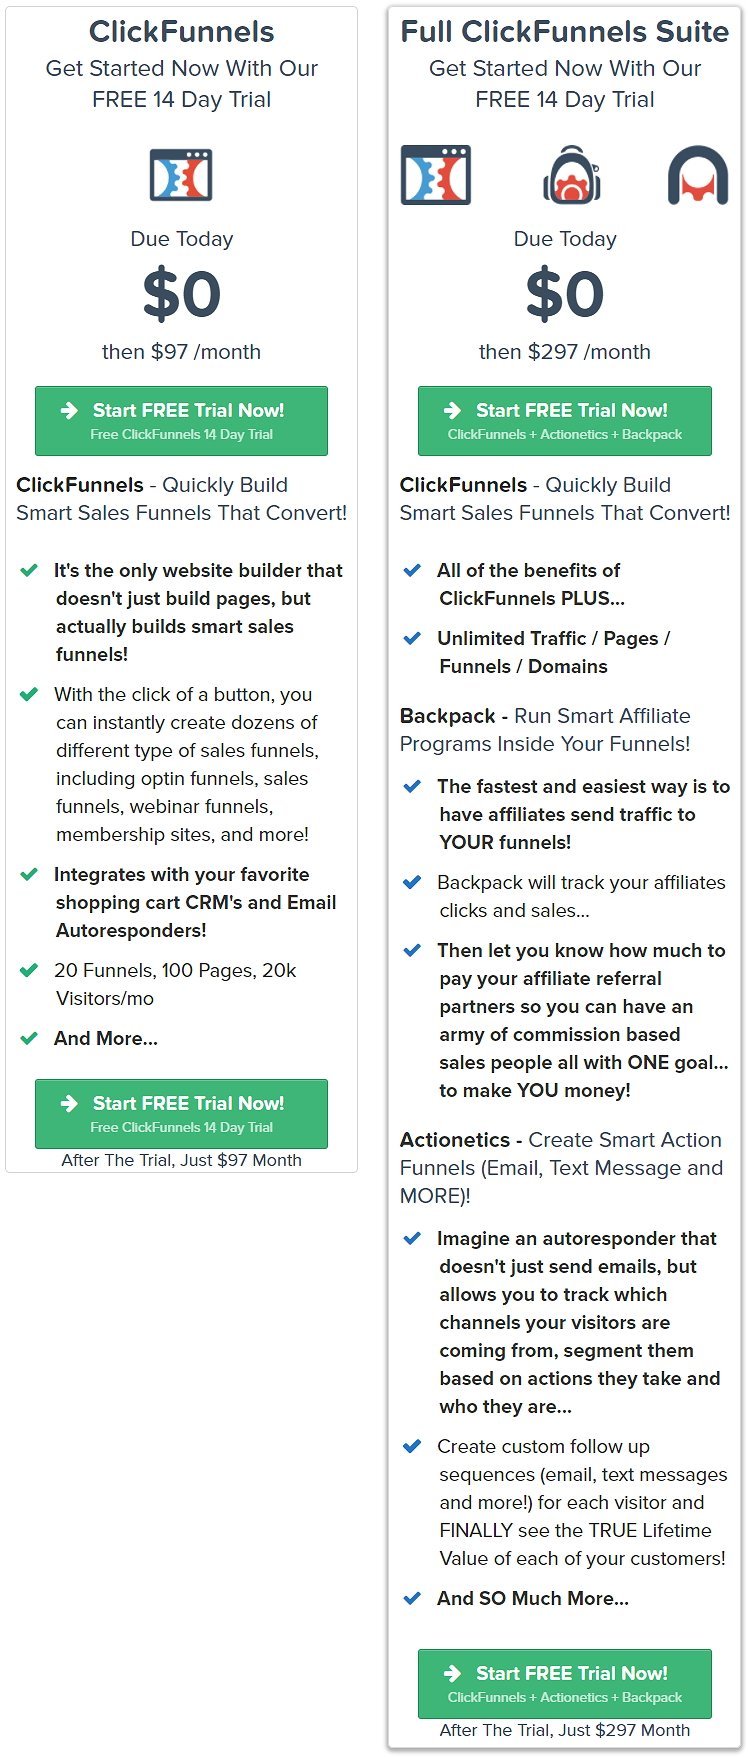 Check ClickFunnels™ Pricing Table Below - Collective plan